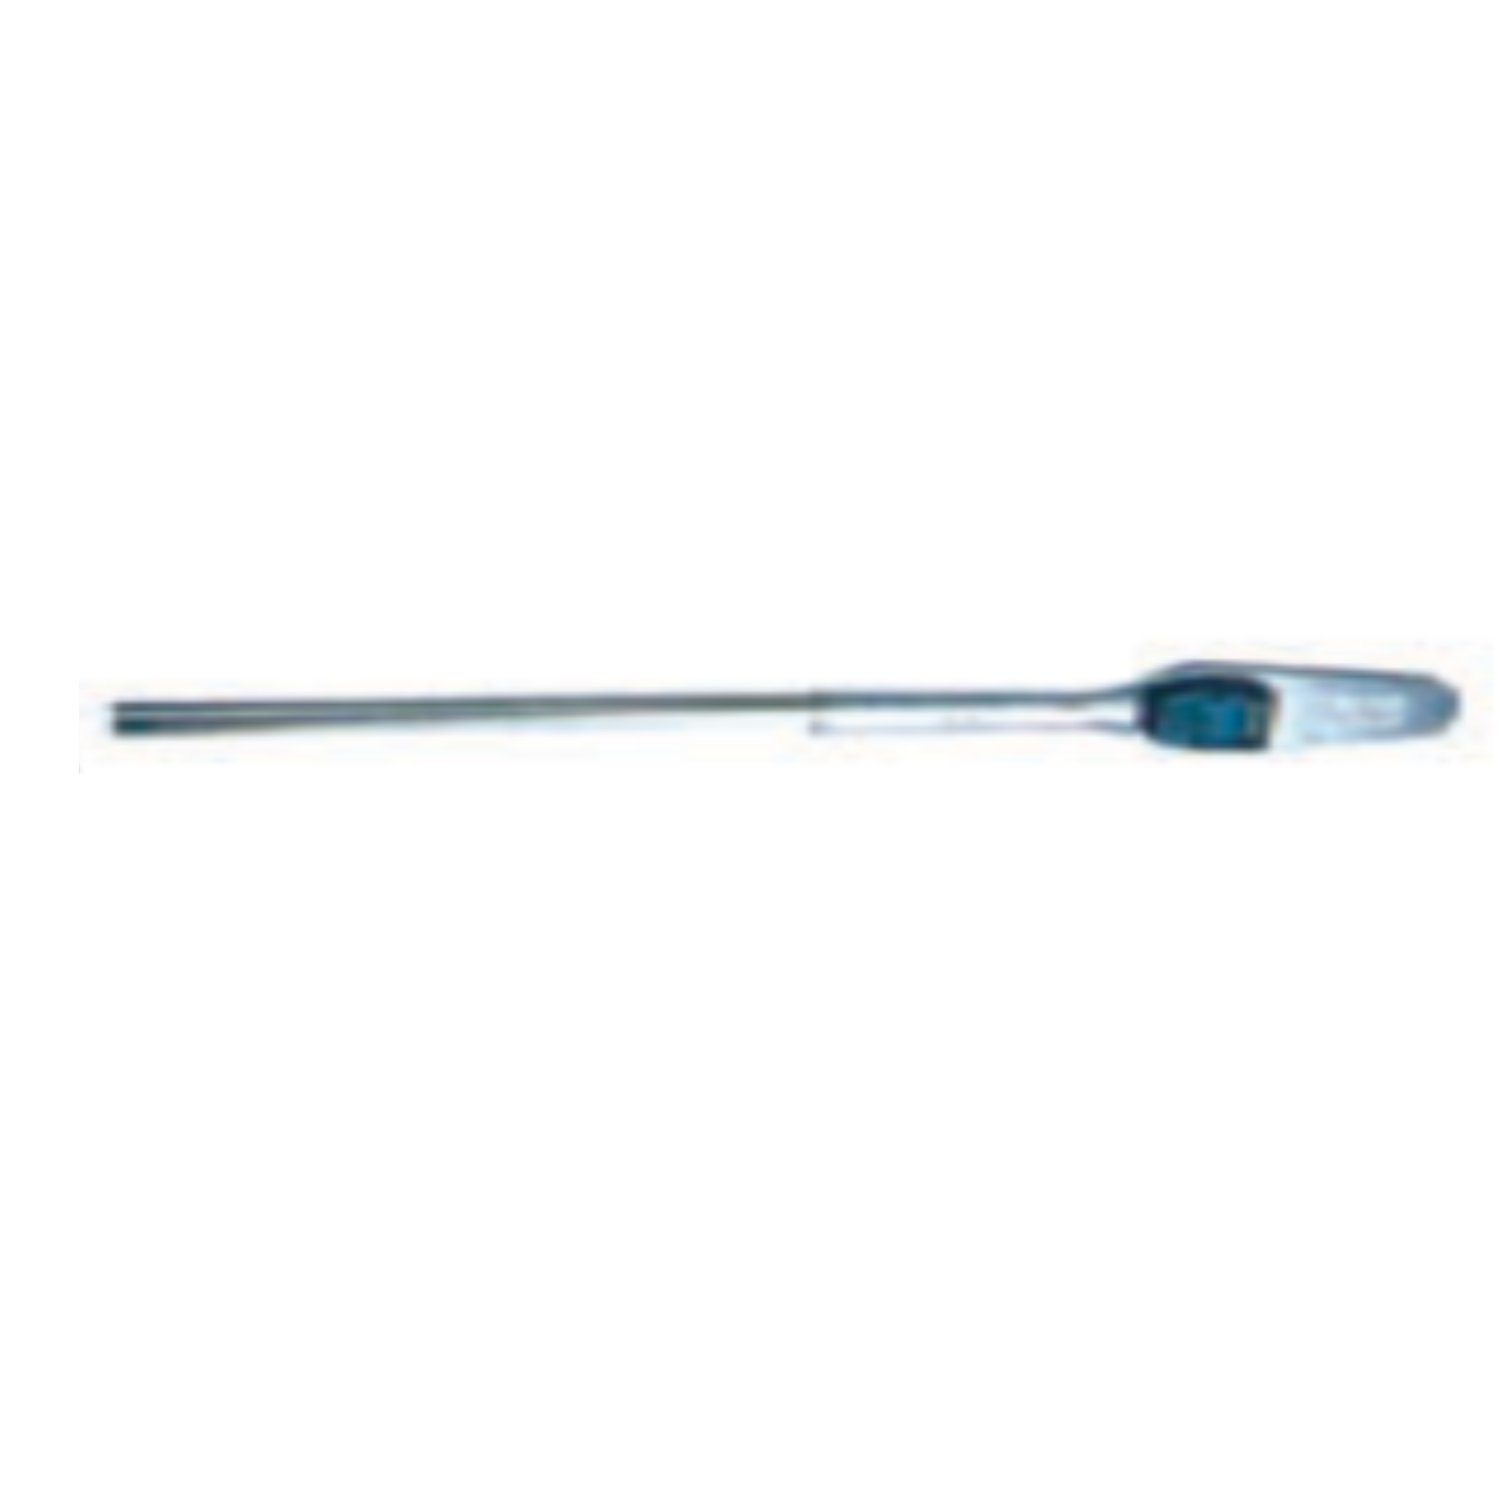 YEW AIK 7144 Computer Torque Wrench (YEW AIK Tools) - Premium Computer Torque Wrench from YEW AIK - Shop now at Yew Aik.